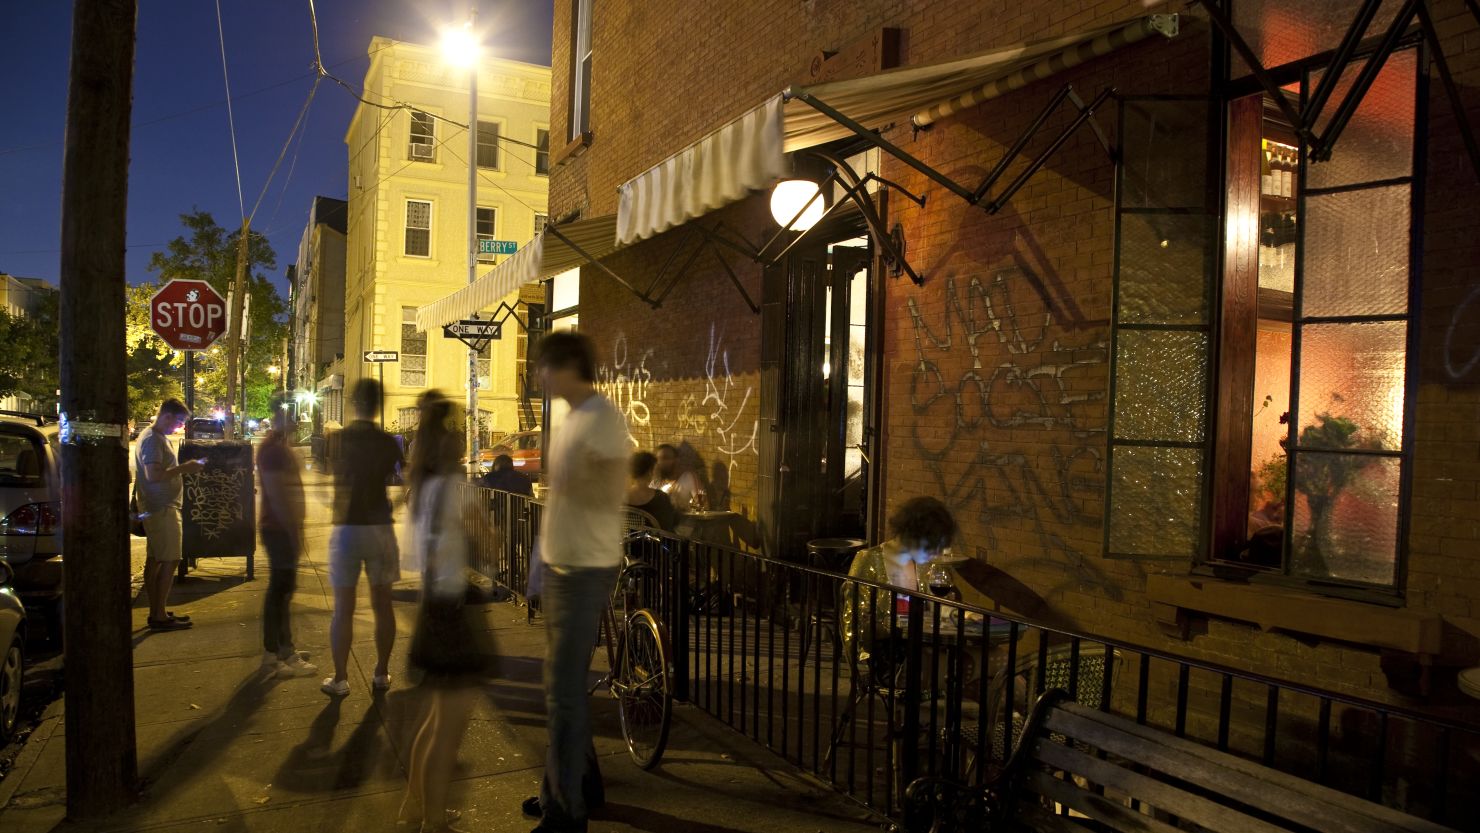 Williamsburg, Brooklyn serves up a host of small pleasures to visitors.